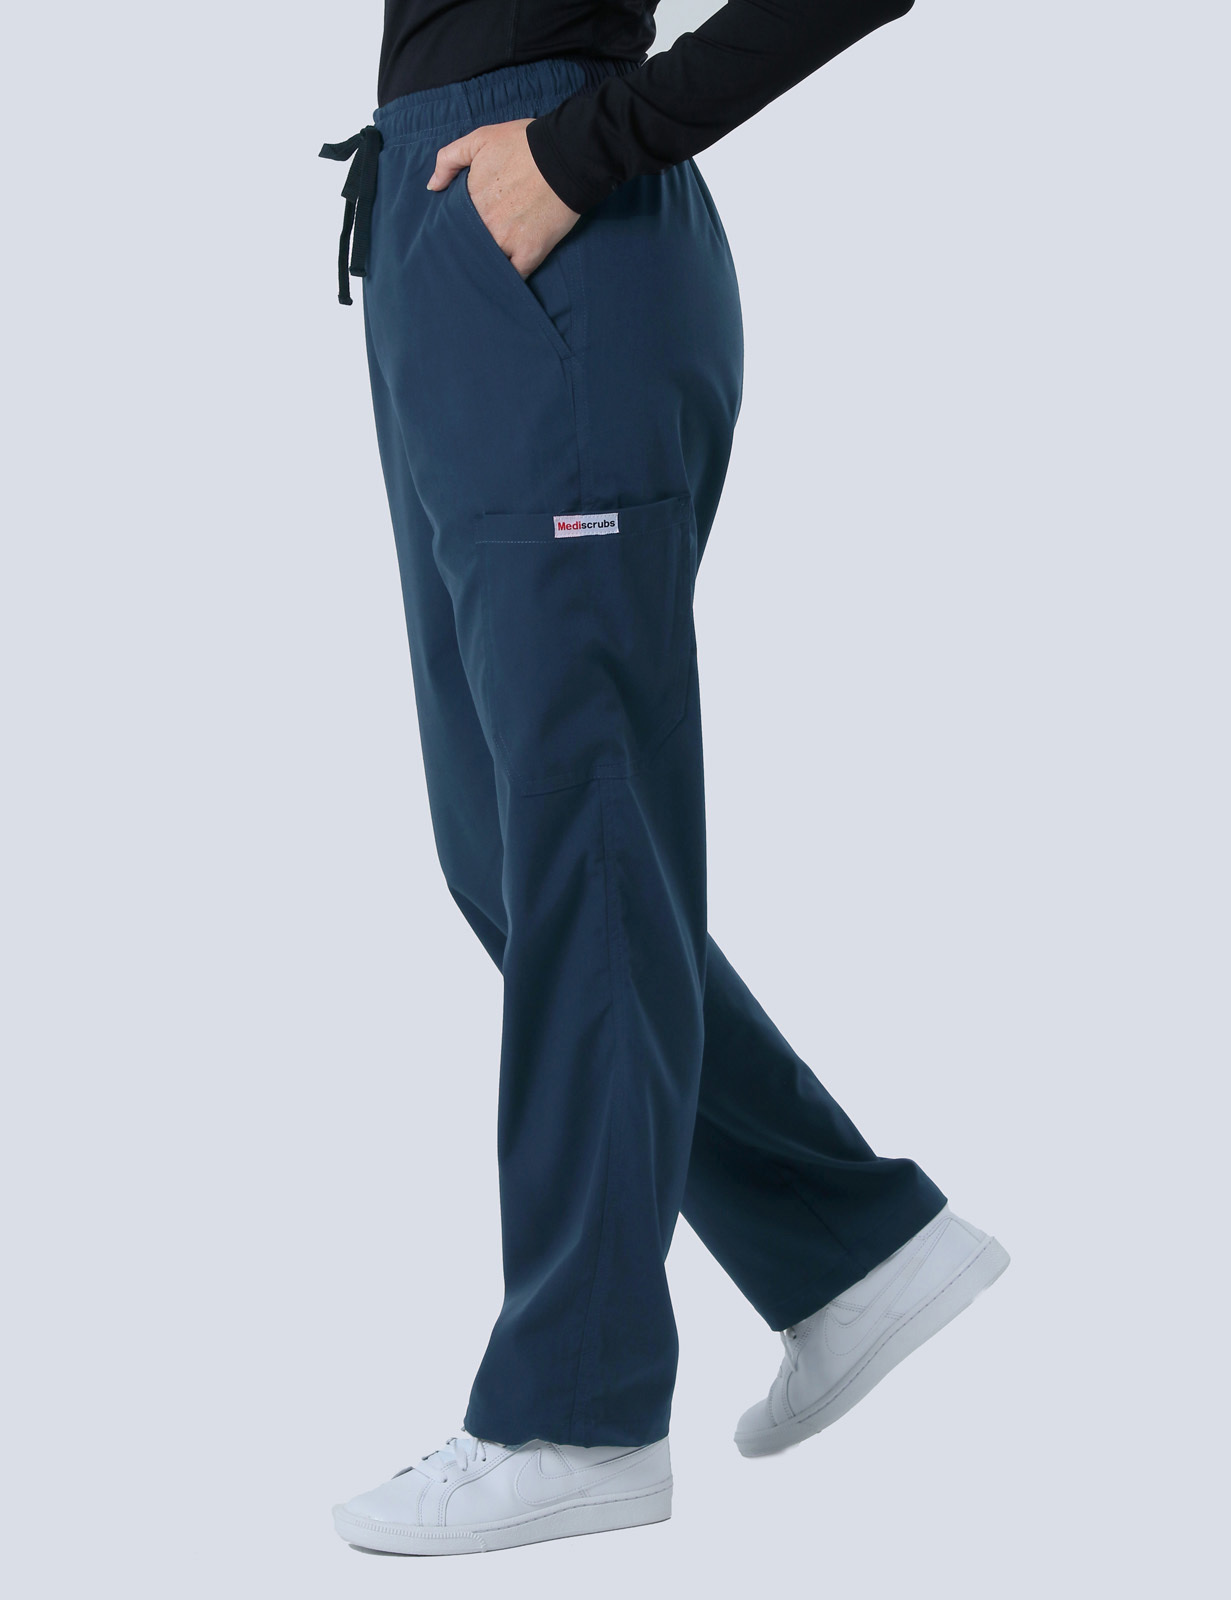 The Angliss Hospital - MI (Women's Fit Solid Scrub Top and Cargo Pants in Navy incl Logos)